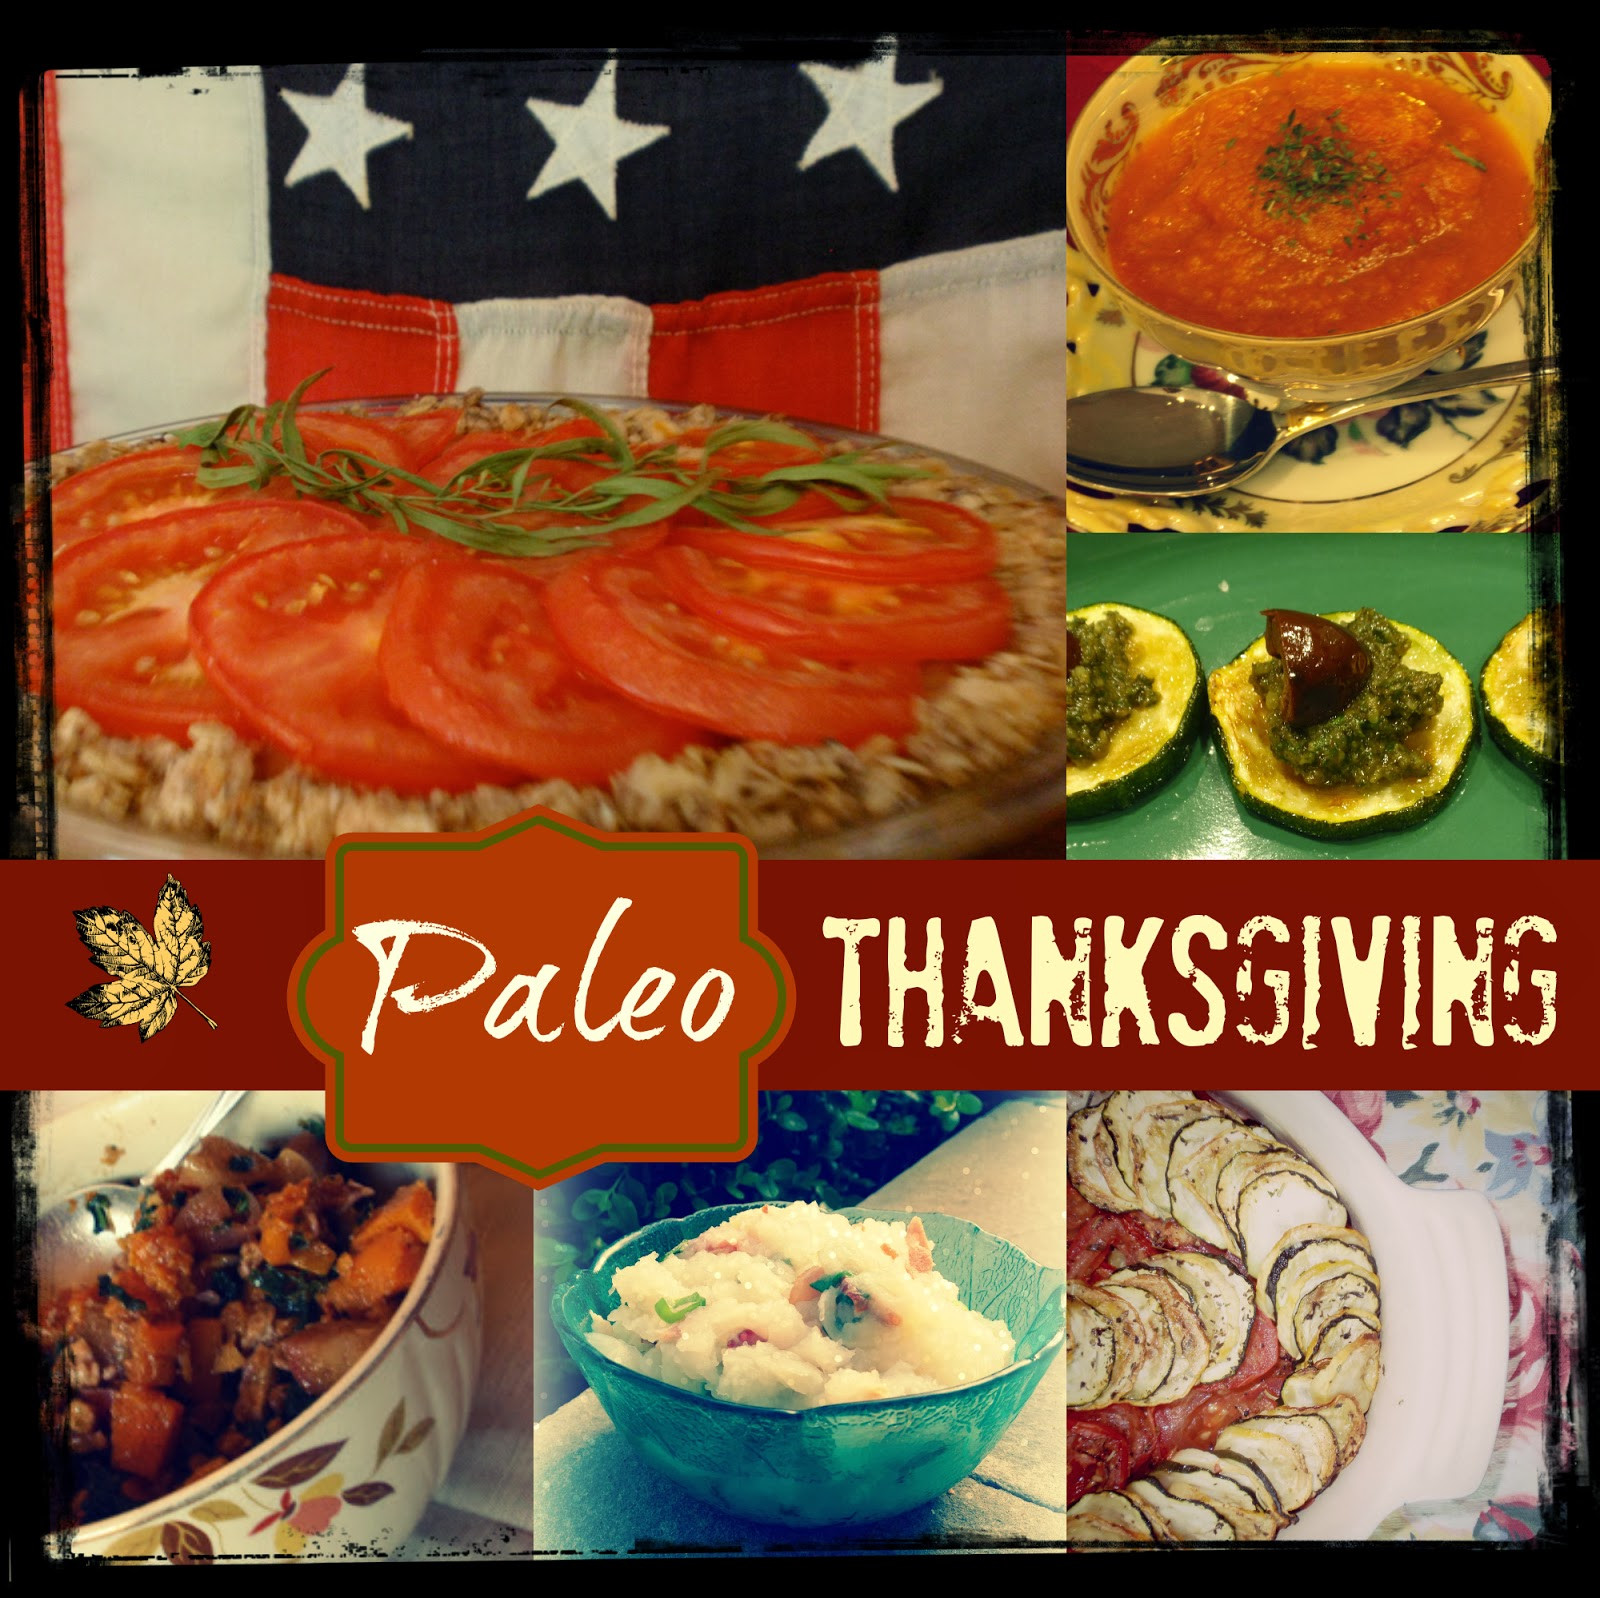 Paleo Thanksgiving Menu
 on the titles of the dishes to jump to the recipes